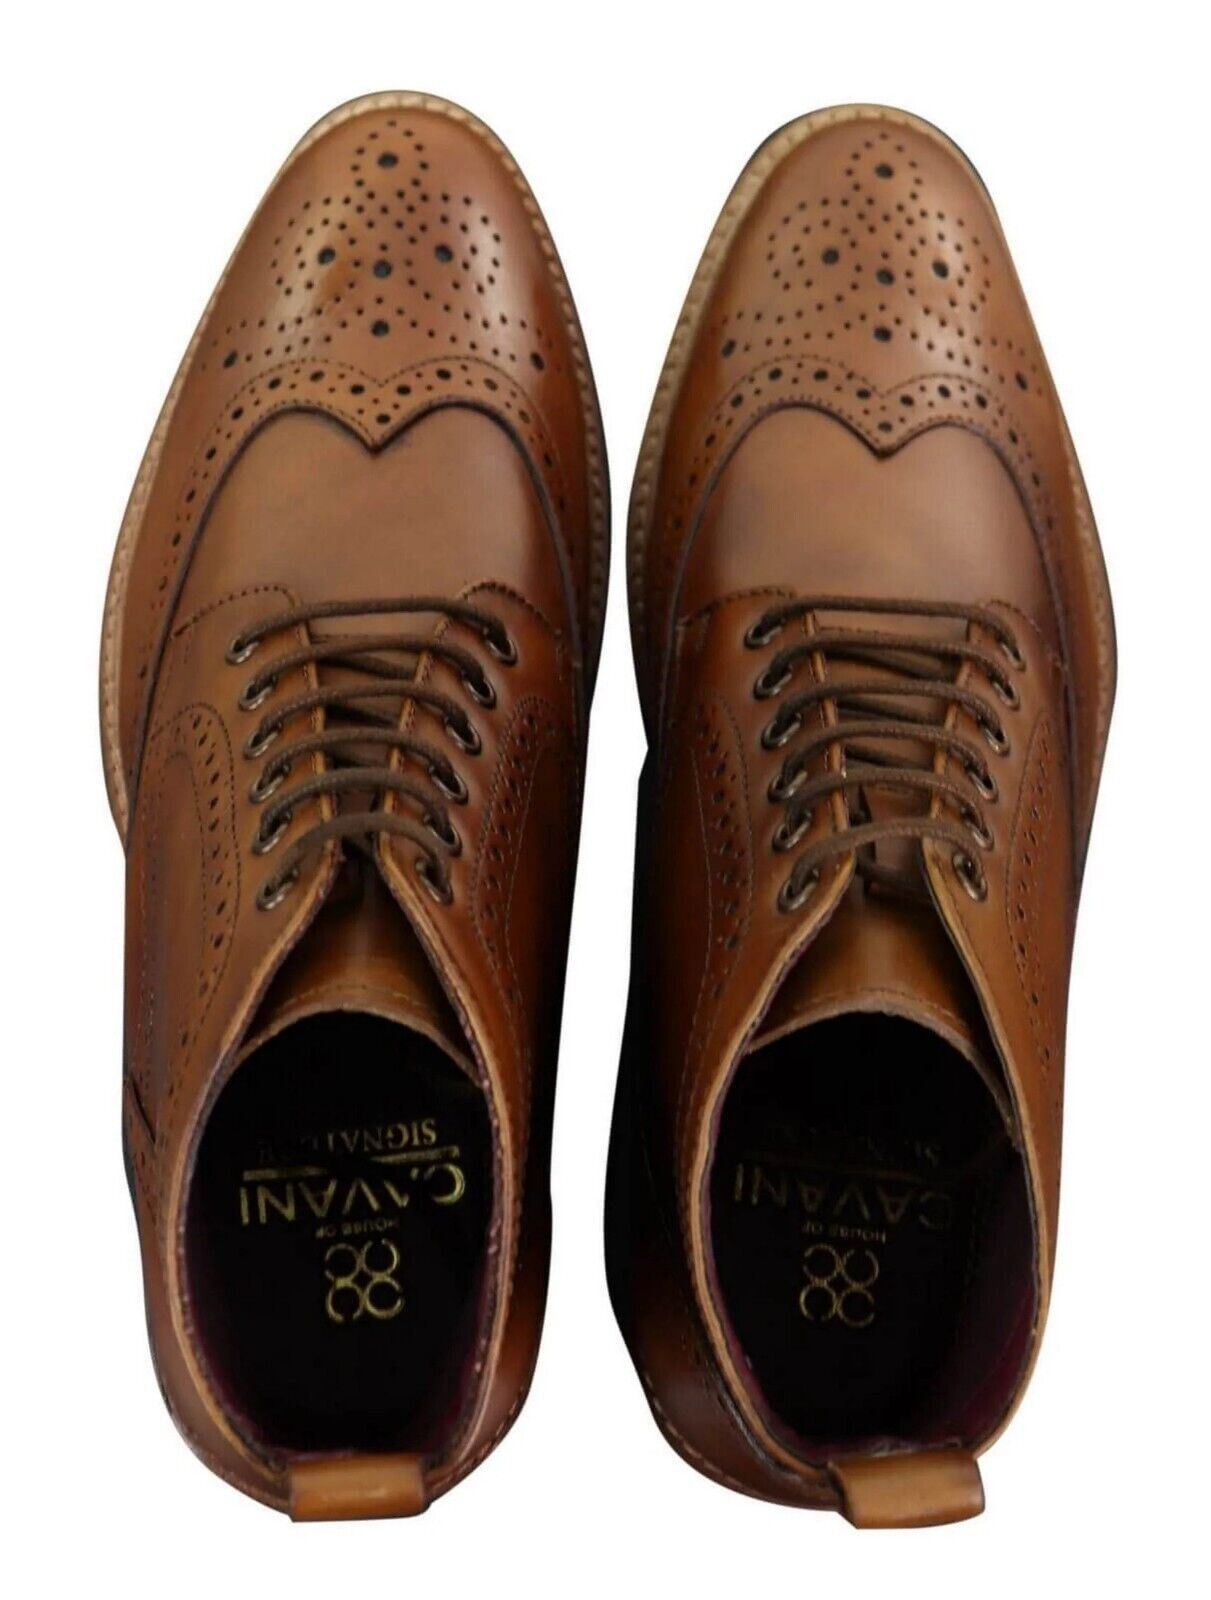 Mens Classic Oxford Brogue Ankle Boots in Tan Leather